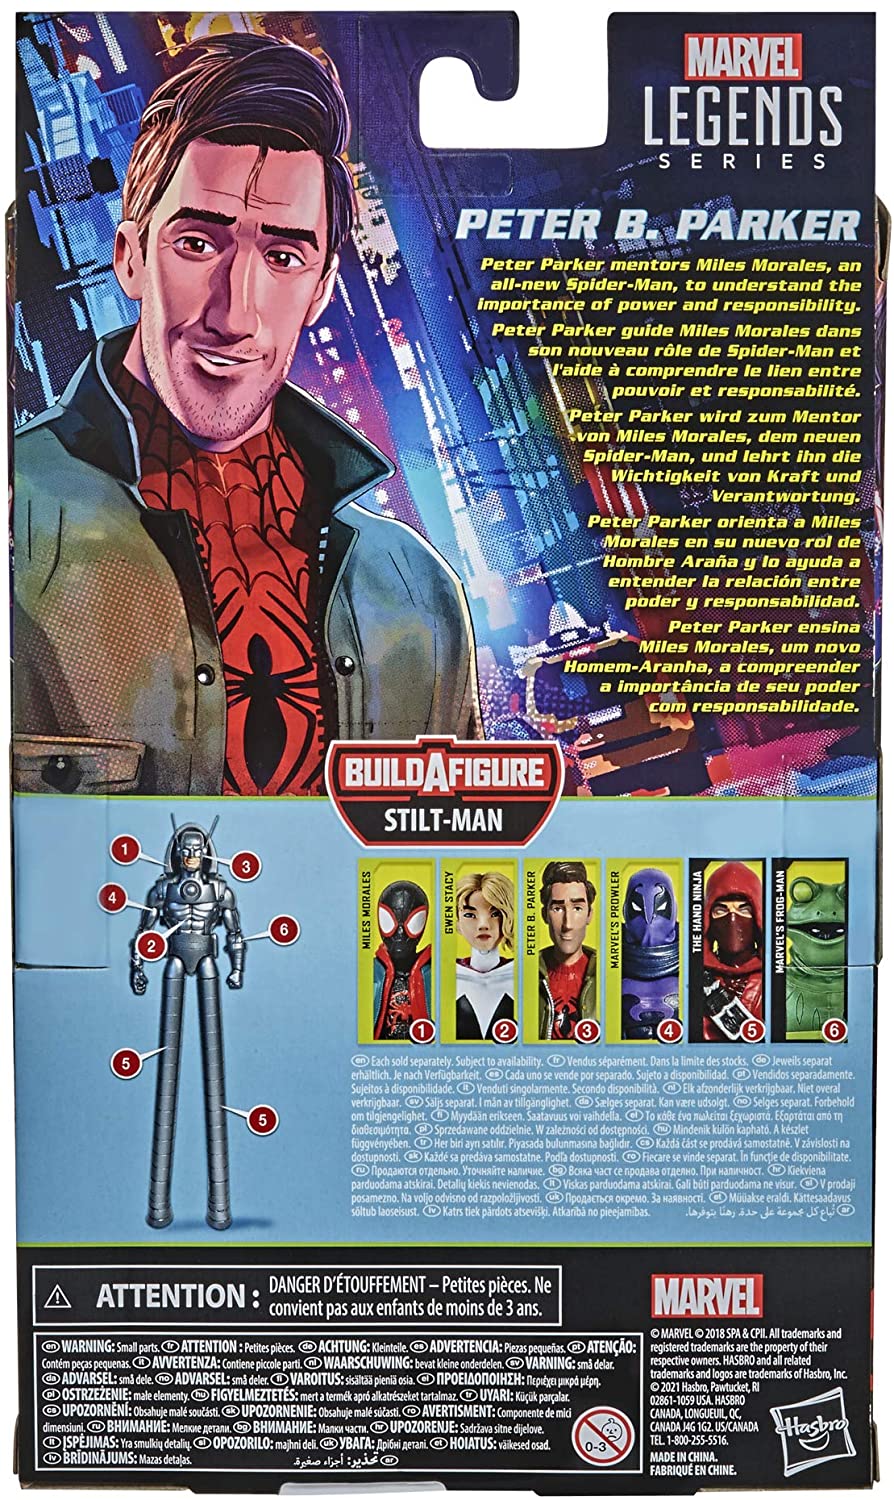 Hasbro Marvel Legends Series Spider-Man: Into the Spider-Verse Peter B. Parker 6-inch Collectible Action Figure Toy For Kids Age 4 and Up